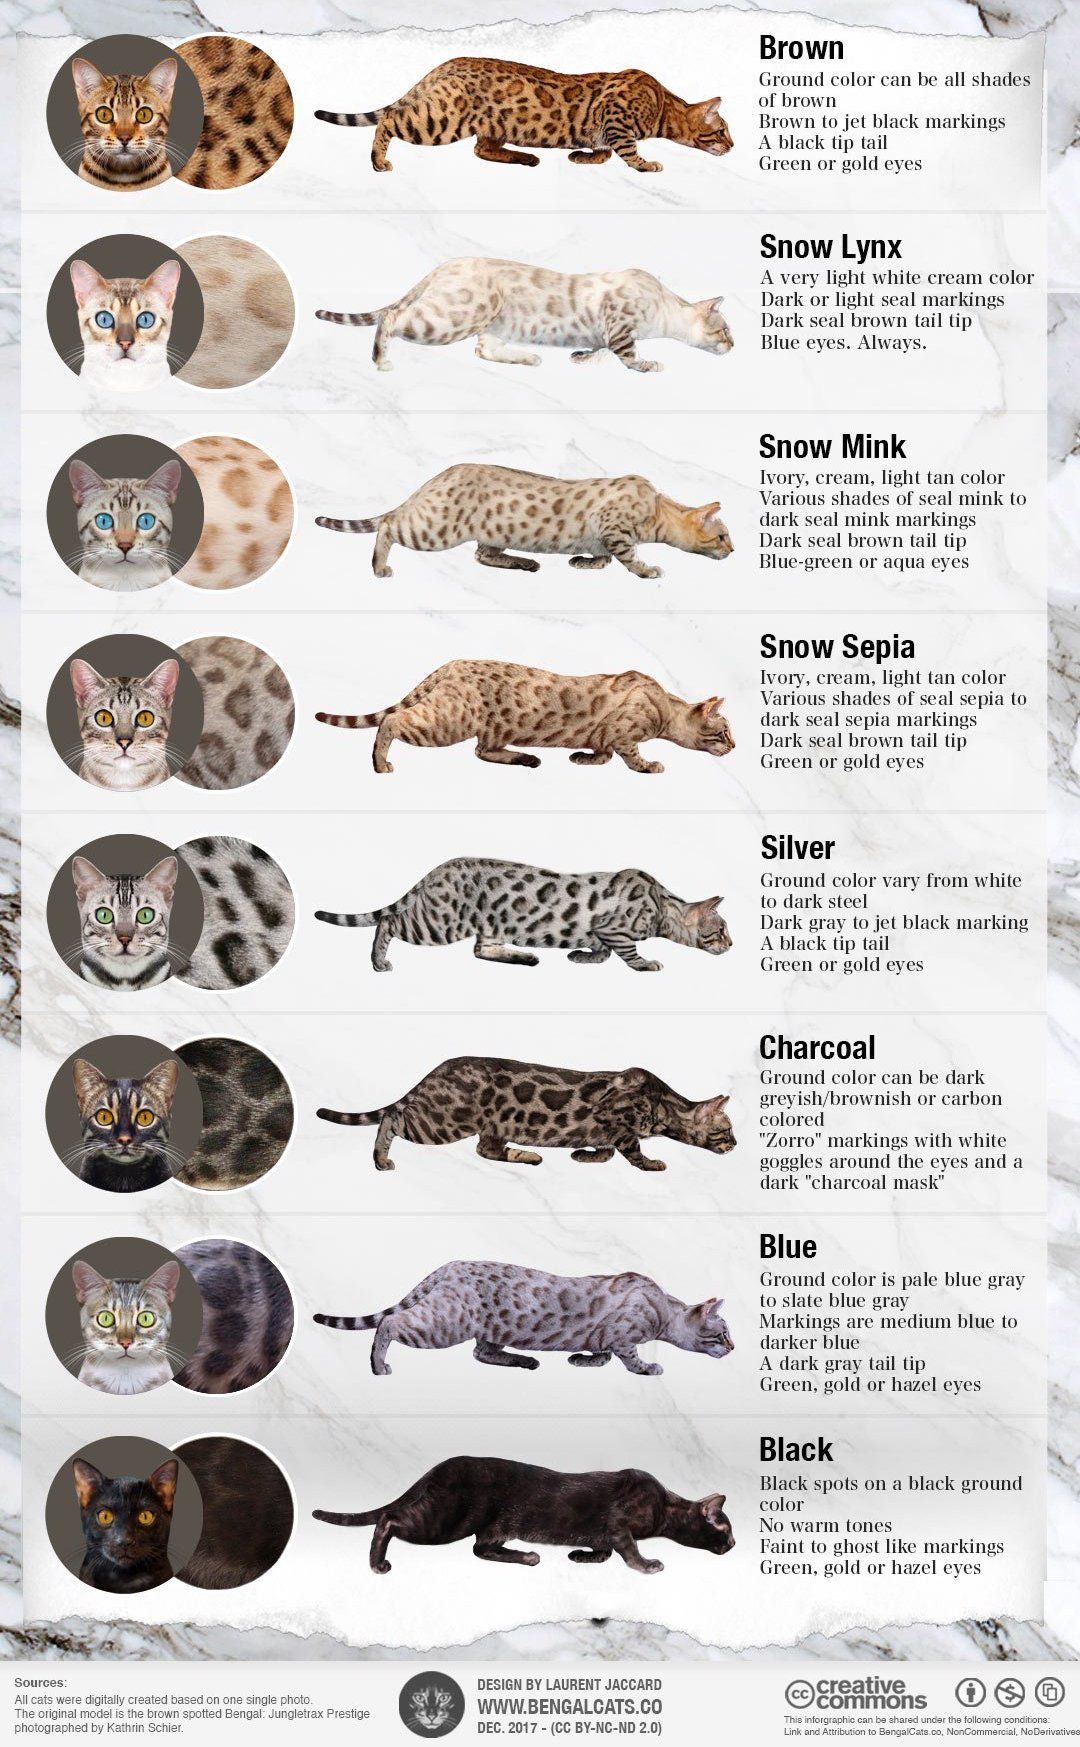 The 8 Types of Bengal Coats | Daily Infographic